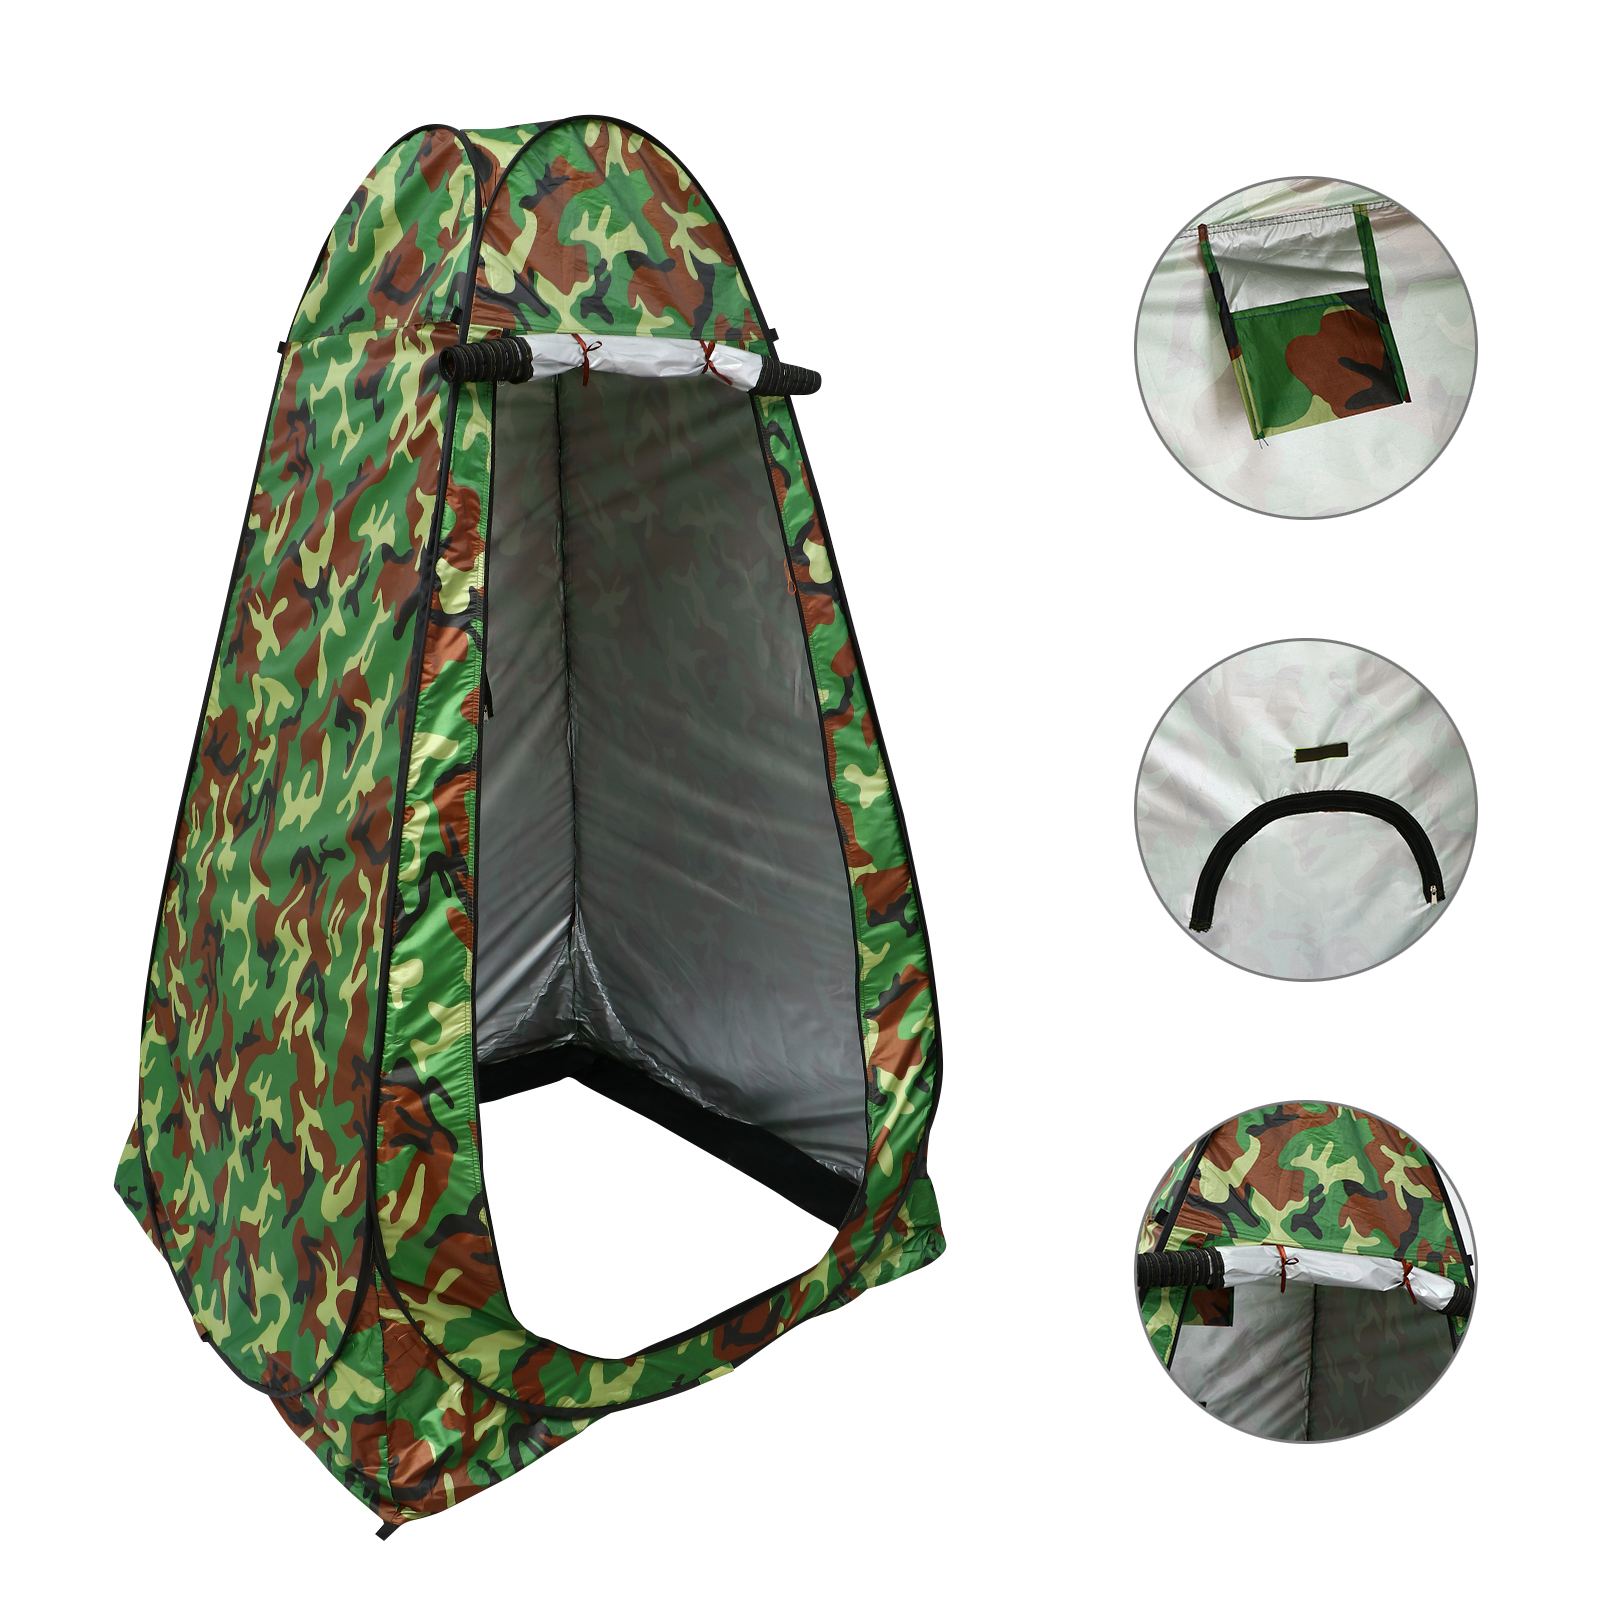 Outdoor Douche Draagbare Privacy Douche Toilet Camping Tent Met Zak